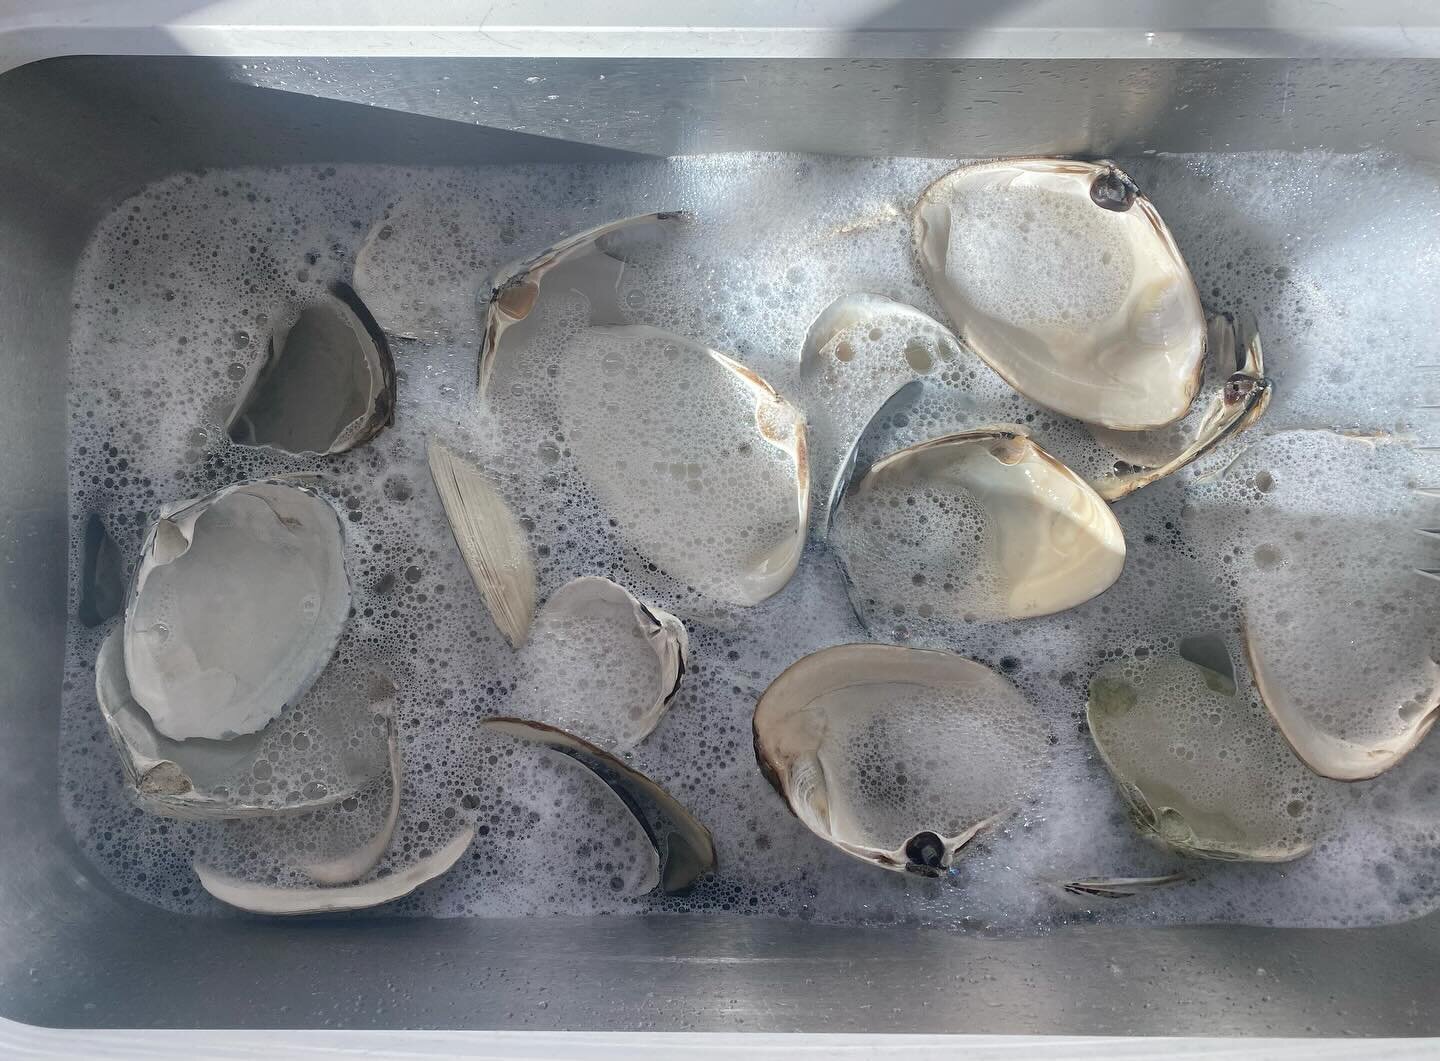 Bath time!

Getting from beach to table is a MULTI level process.  So much work goes into each LJM shell dish. 

This is the 3rd level&mdash;1st was combing the beach and surf (in bare feet so I could fight the seagulls for my shells), and 2nd was so